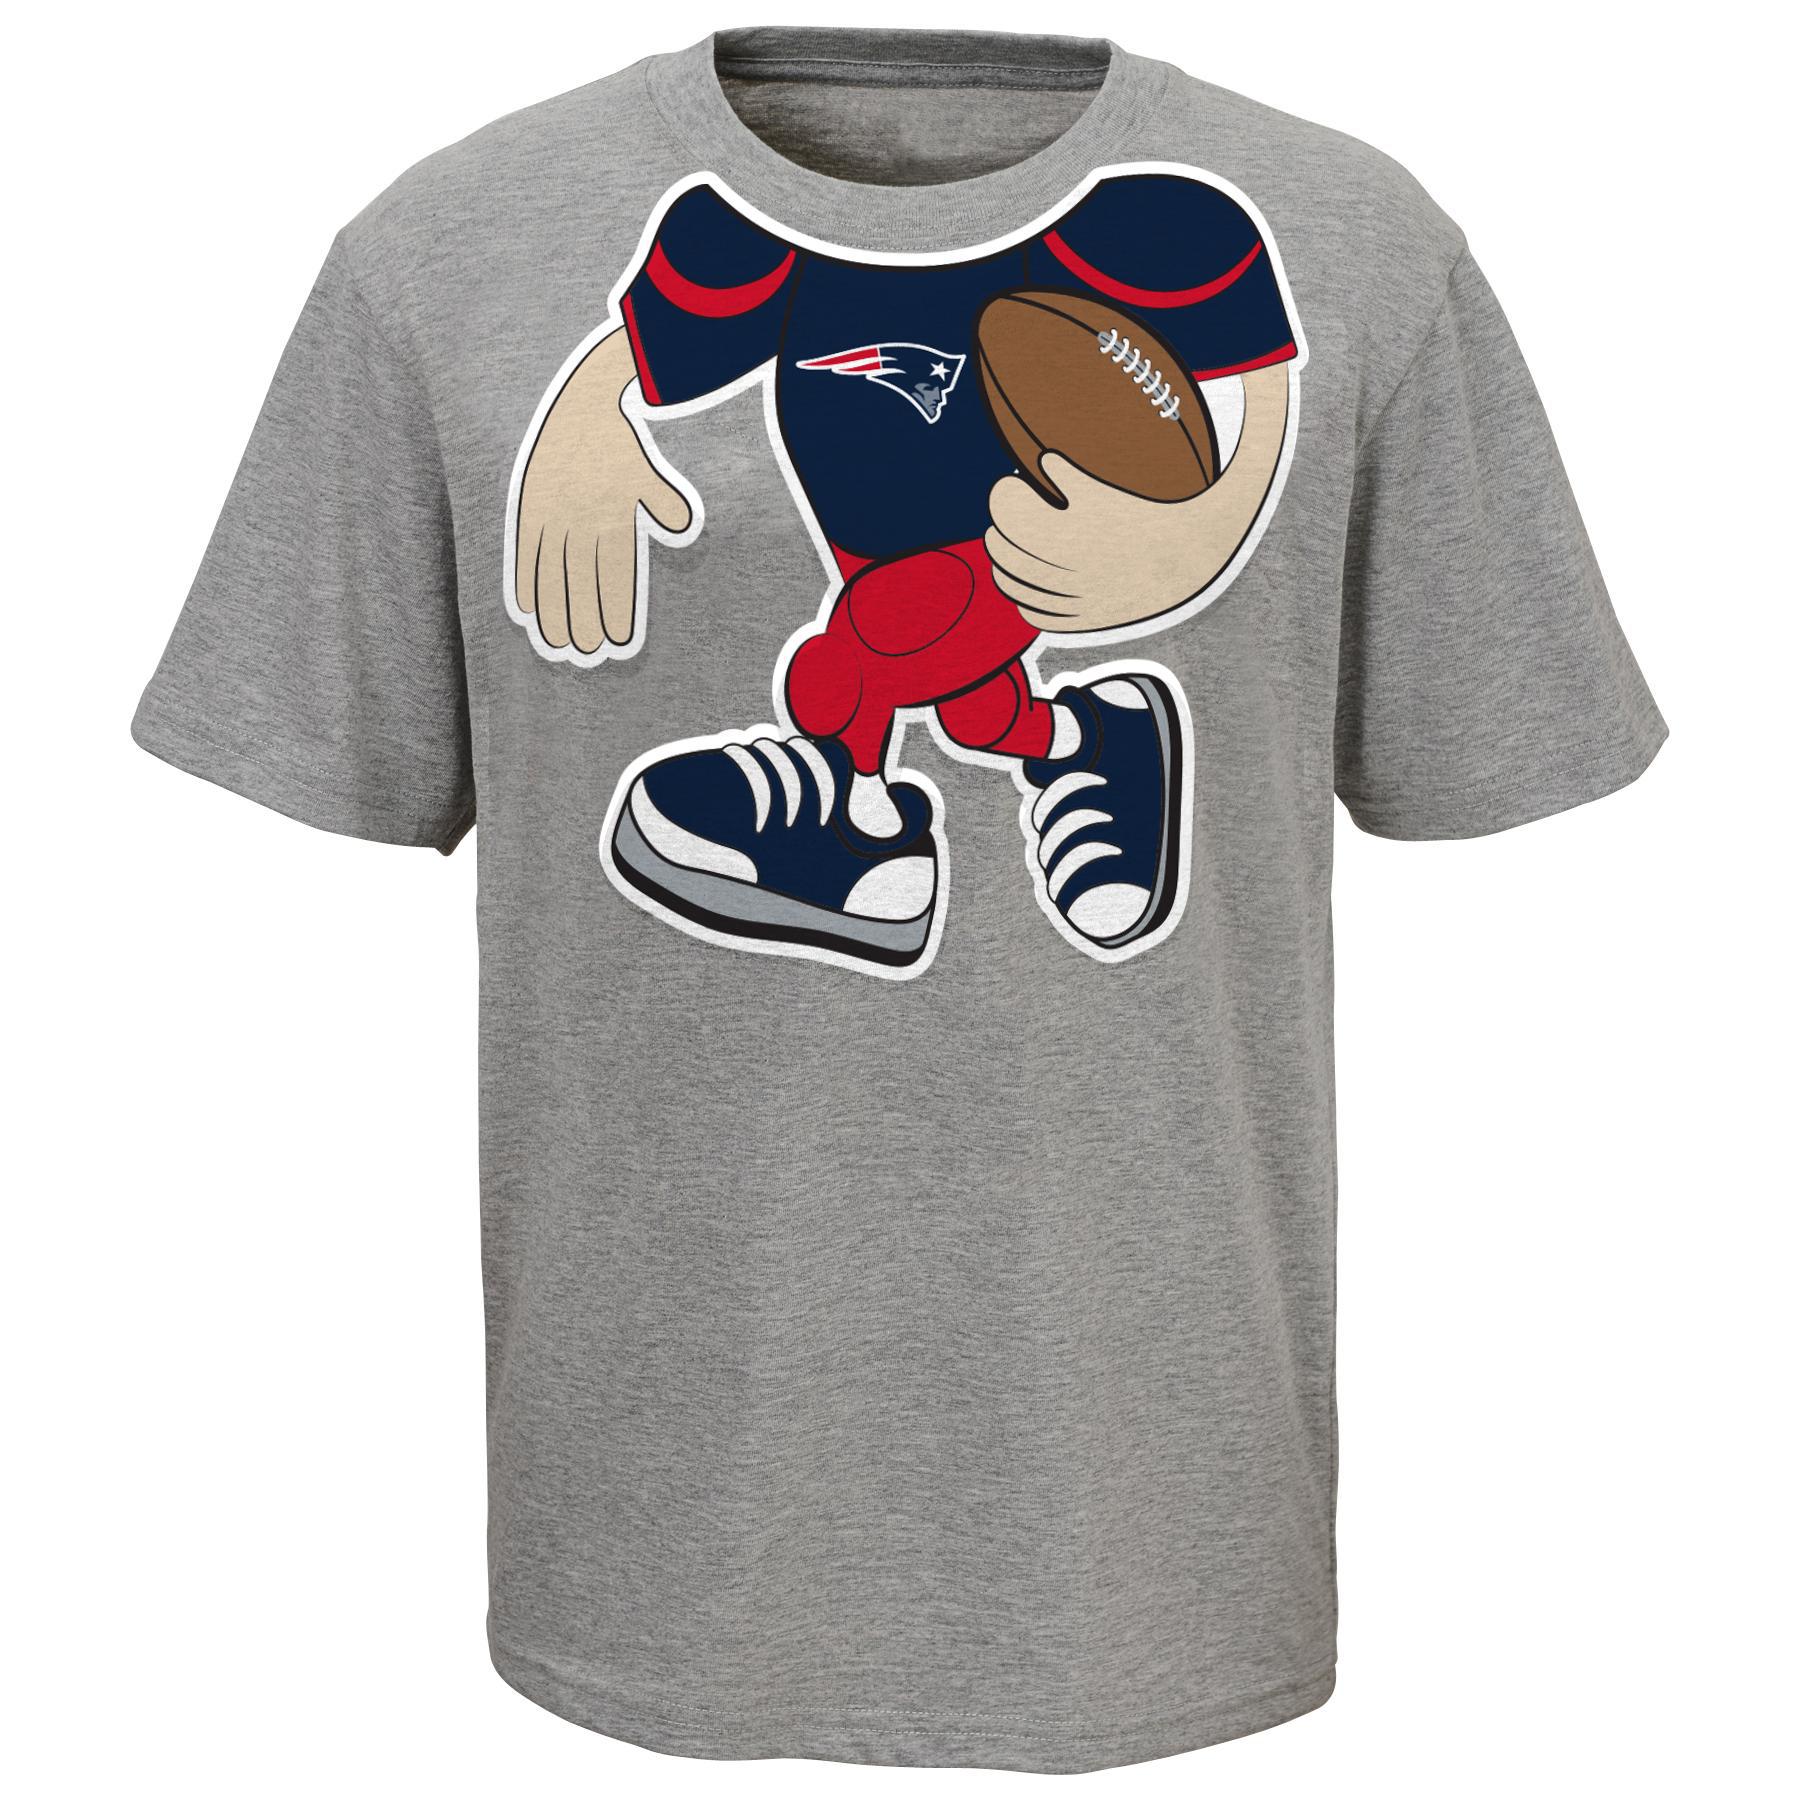 NFL Toddler Boys' Graphic T-Shirt - New England Patriots